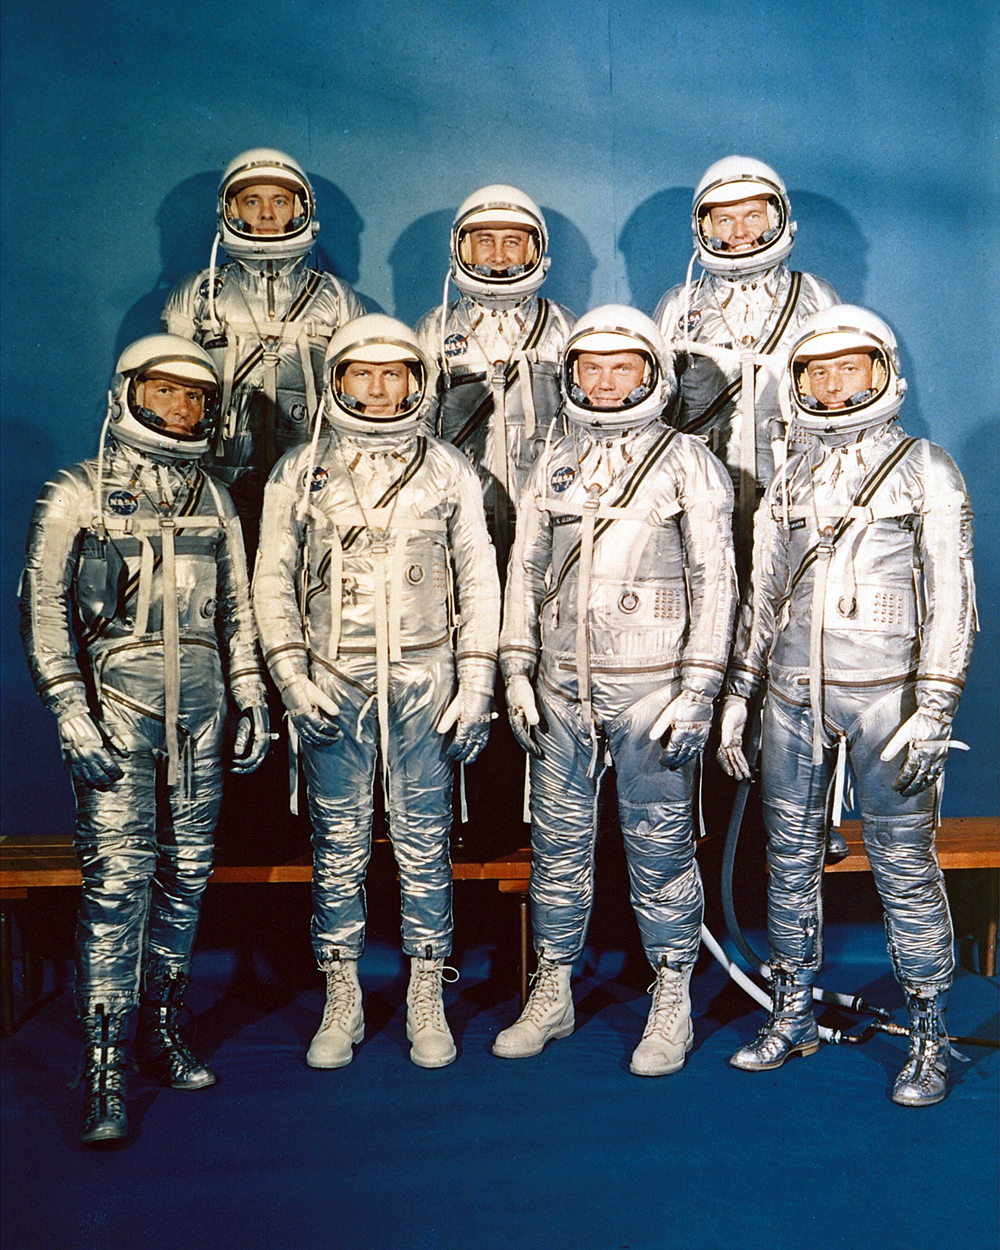 The Mercury 7 Astronauts: NASA’s First Dwelling Vacationers